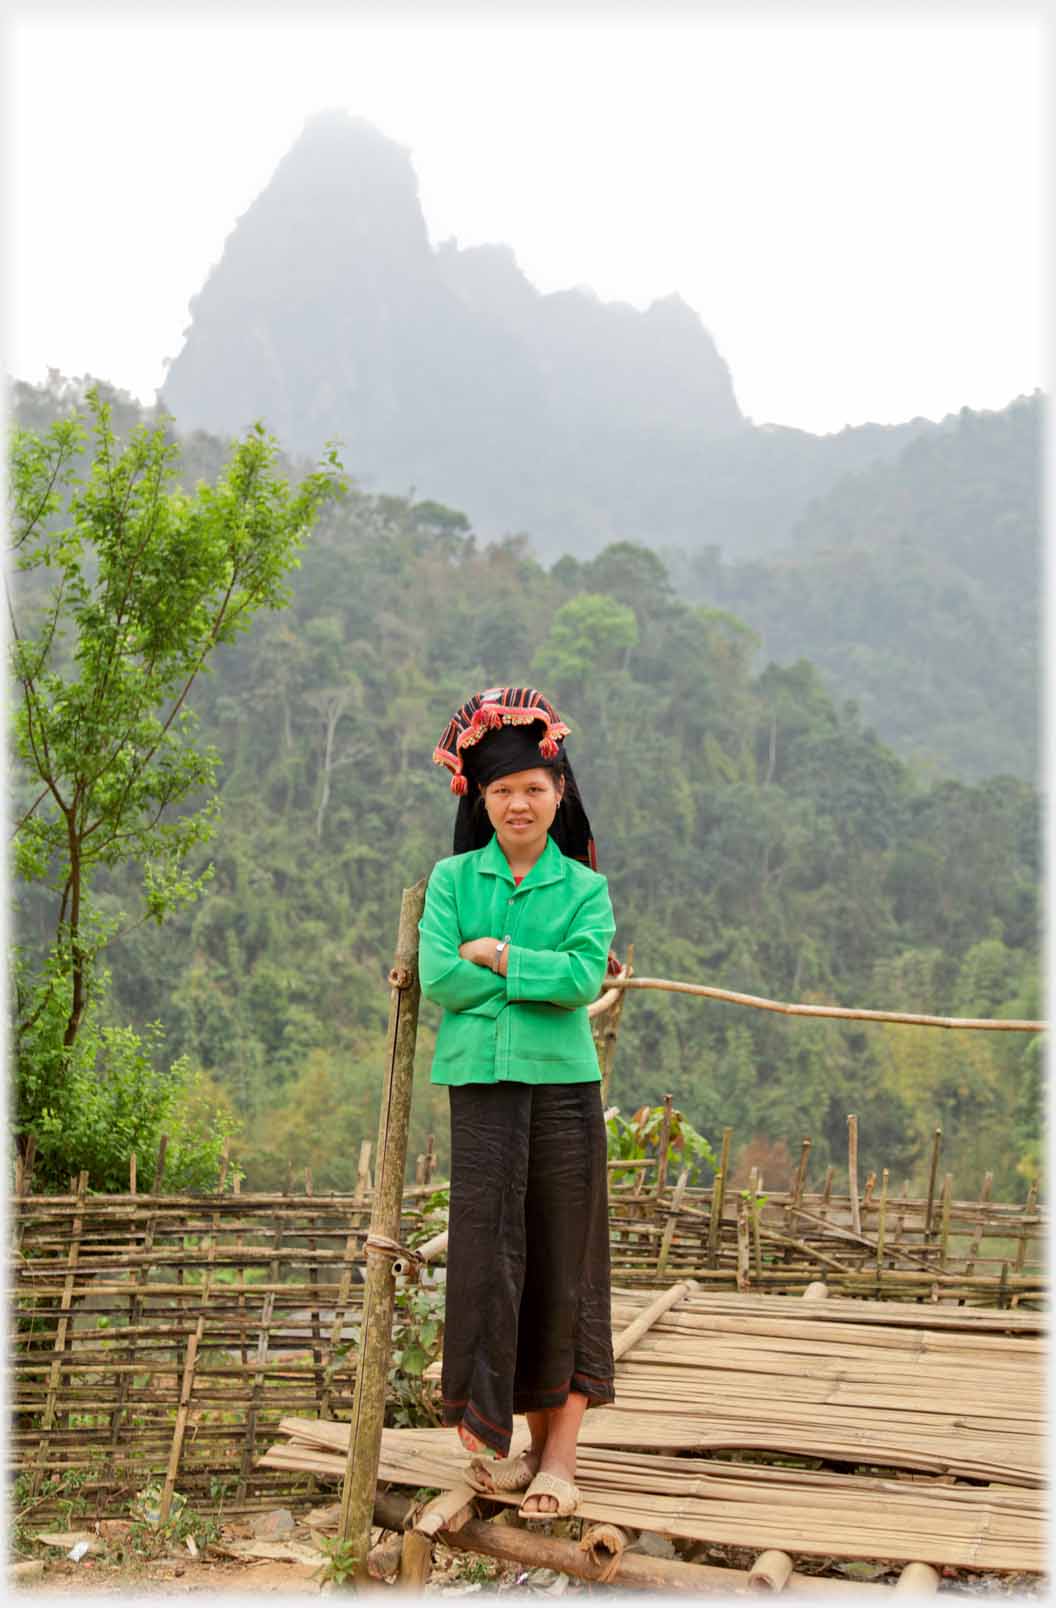 Same woman in green top with high karst mountain behind.